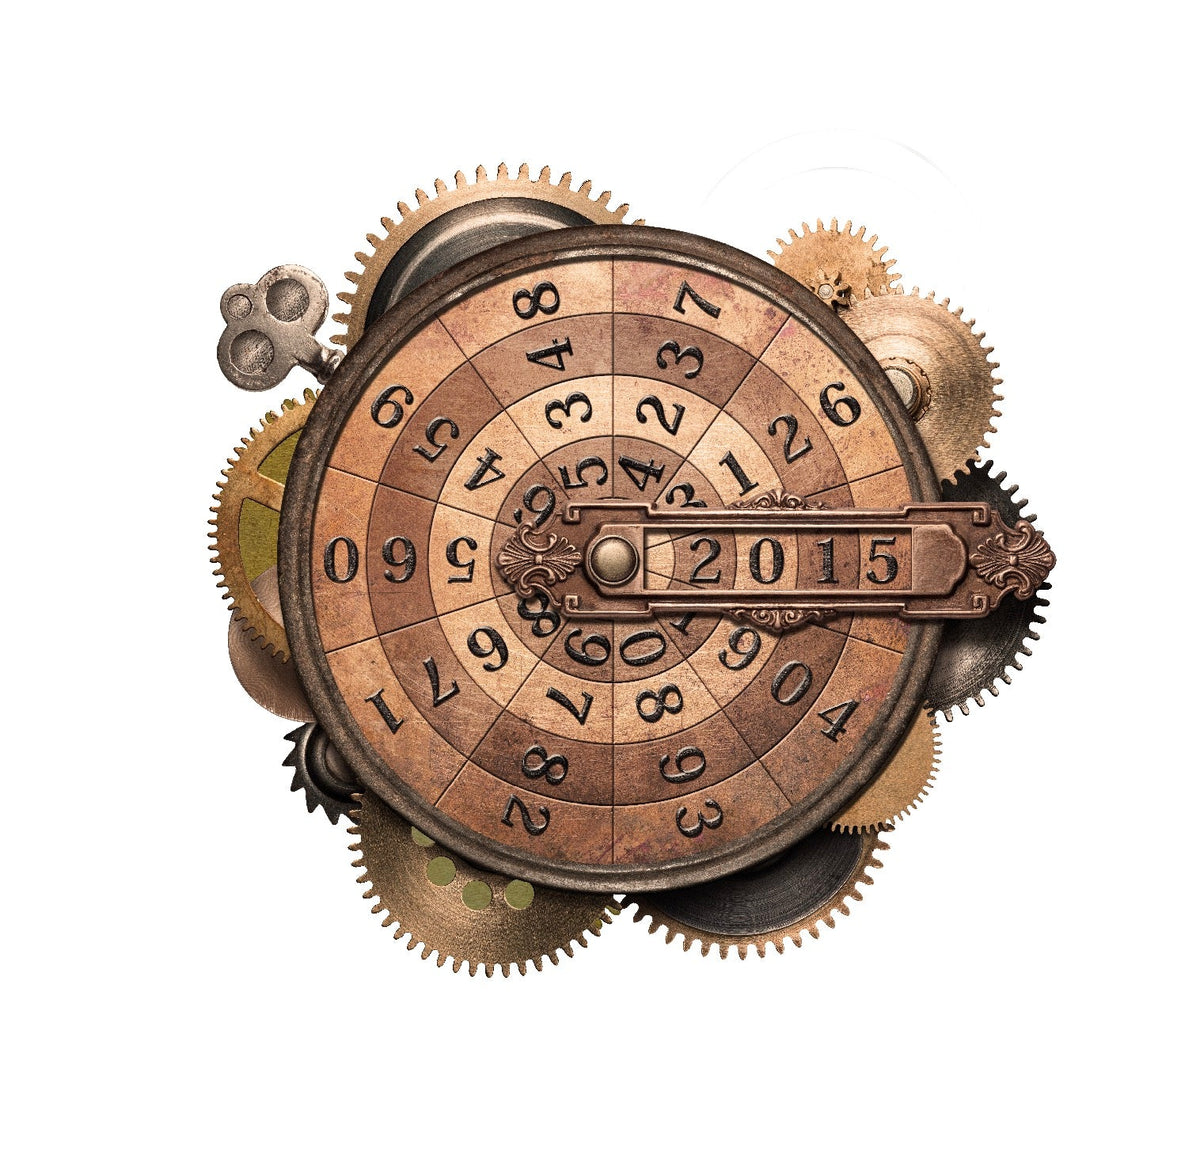 Steampunk Code Lock & Key Decal - CoverAlls Decals